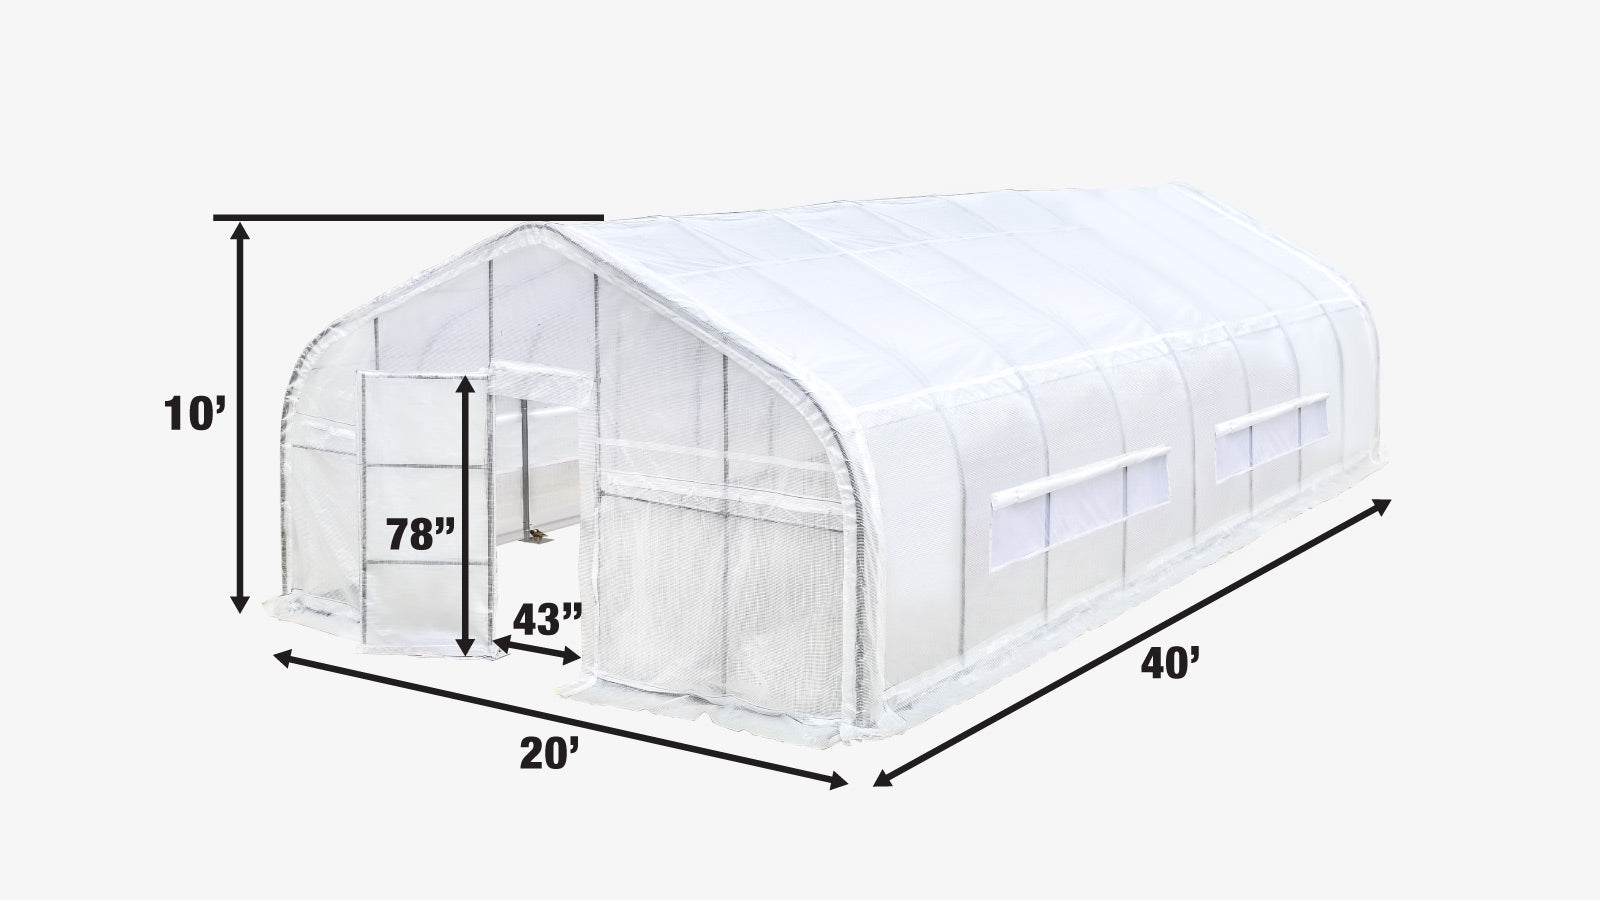 TMG Industrial 20' x 40' Tunnel Greenhouse Grow Tent with 12 Mil Ripstop Leno Mesh Cover, Cold Frame, Roll-up Windows, Peak Ceiling Roof, TMG-GH2040-specifications-image